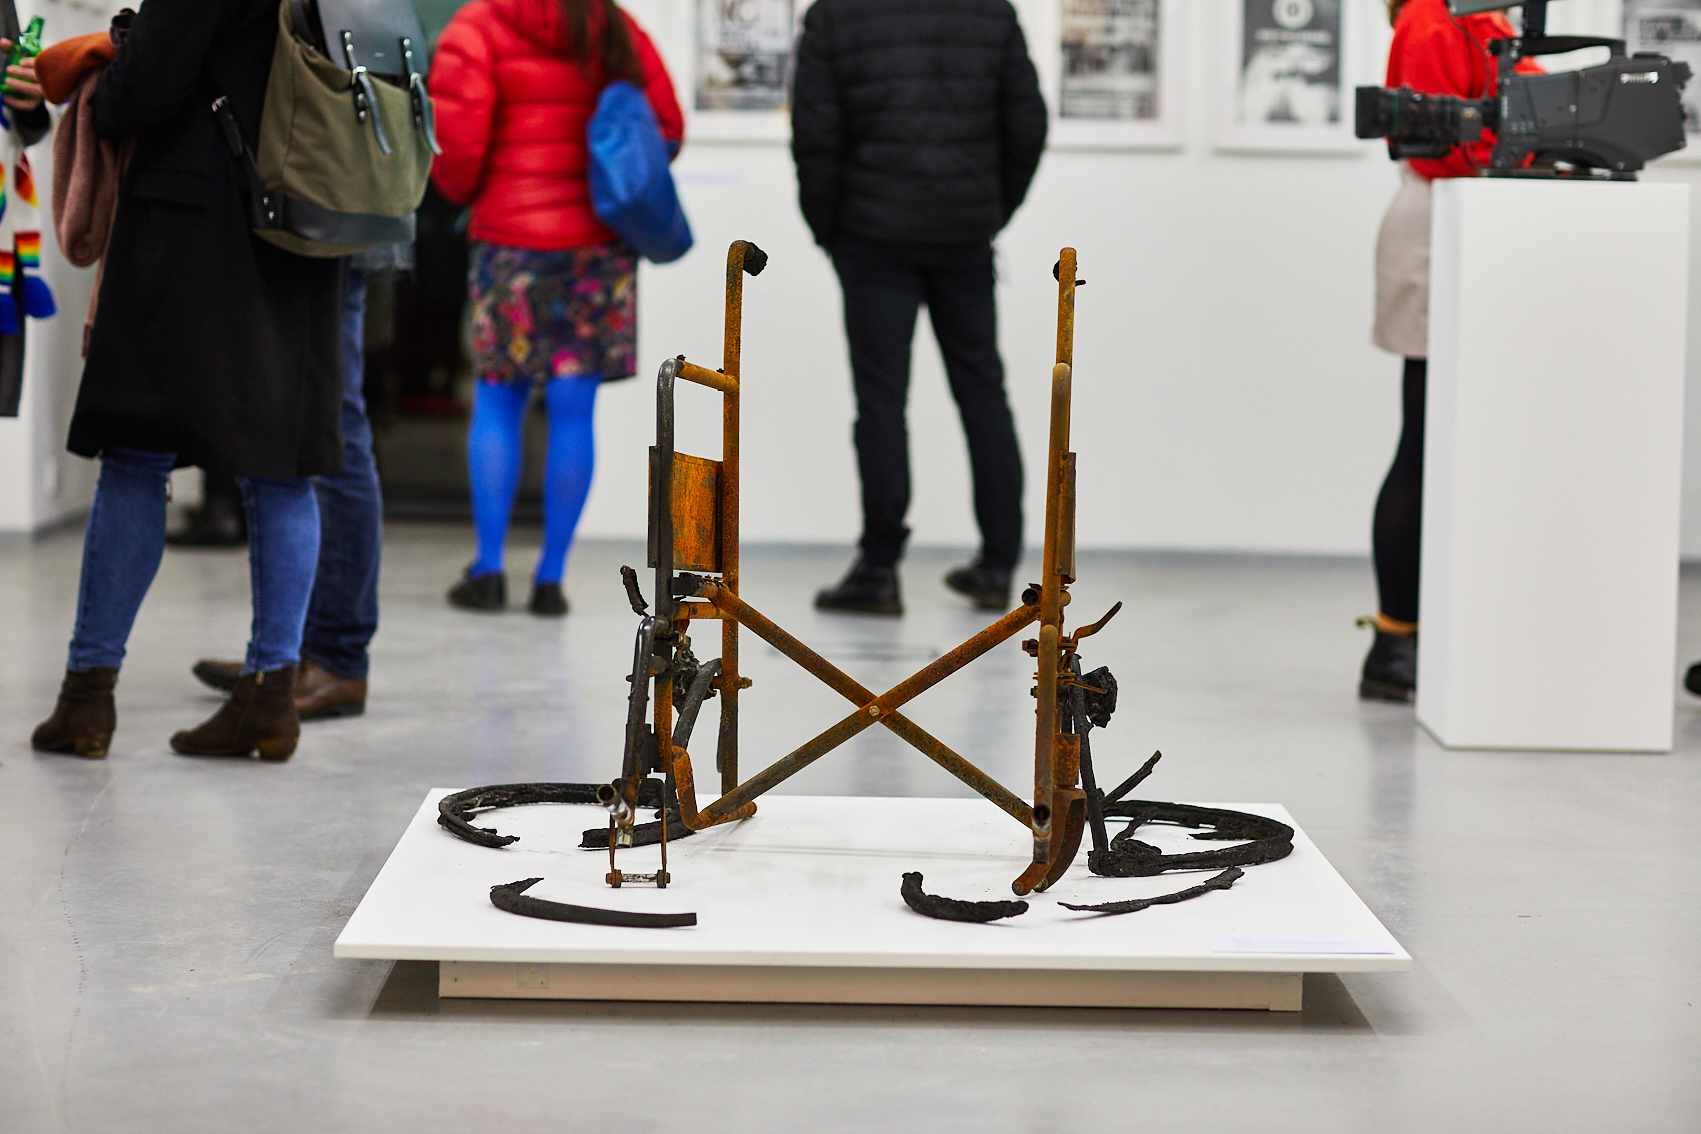 Justin Edgar: Reasonable Adjustment – The Disabled Armed Resistance Movement at The Art House